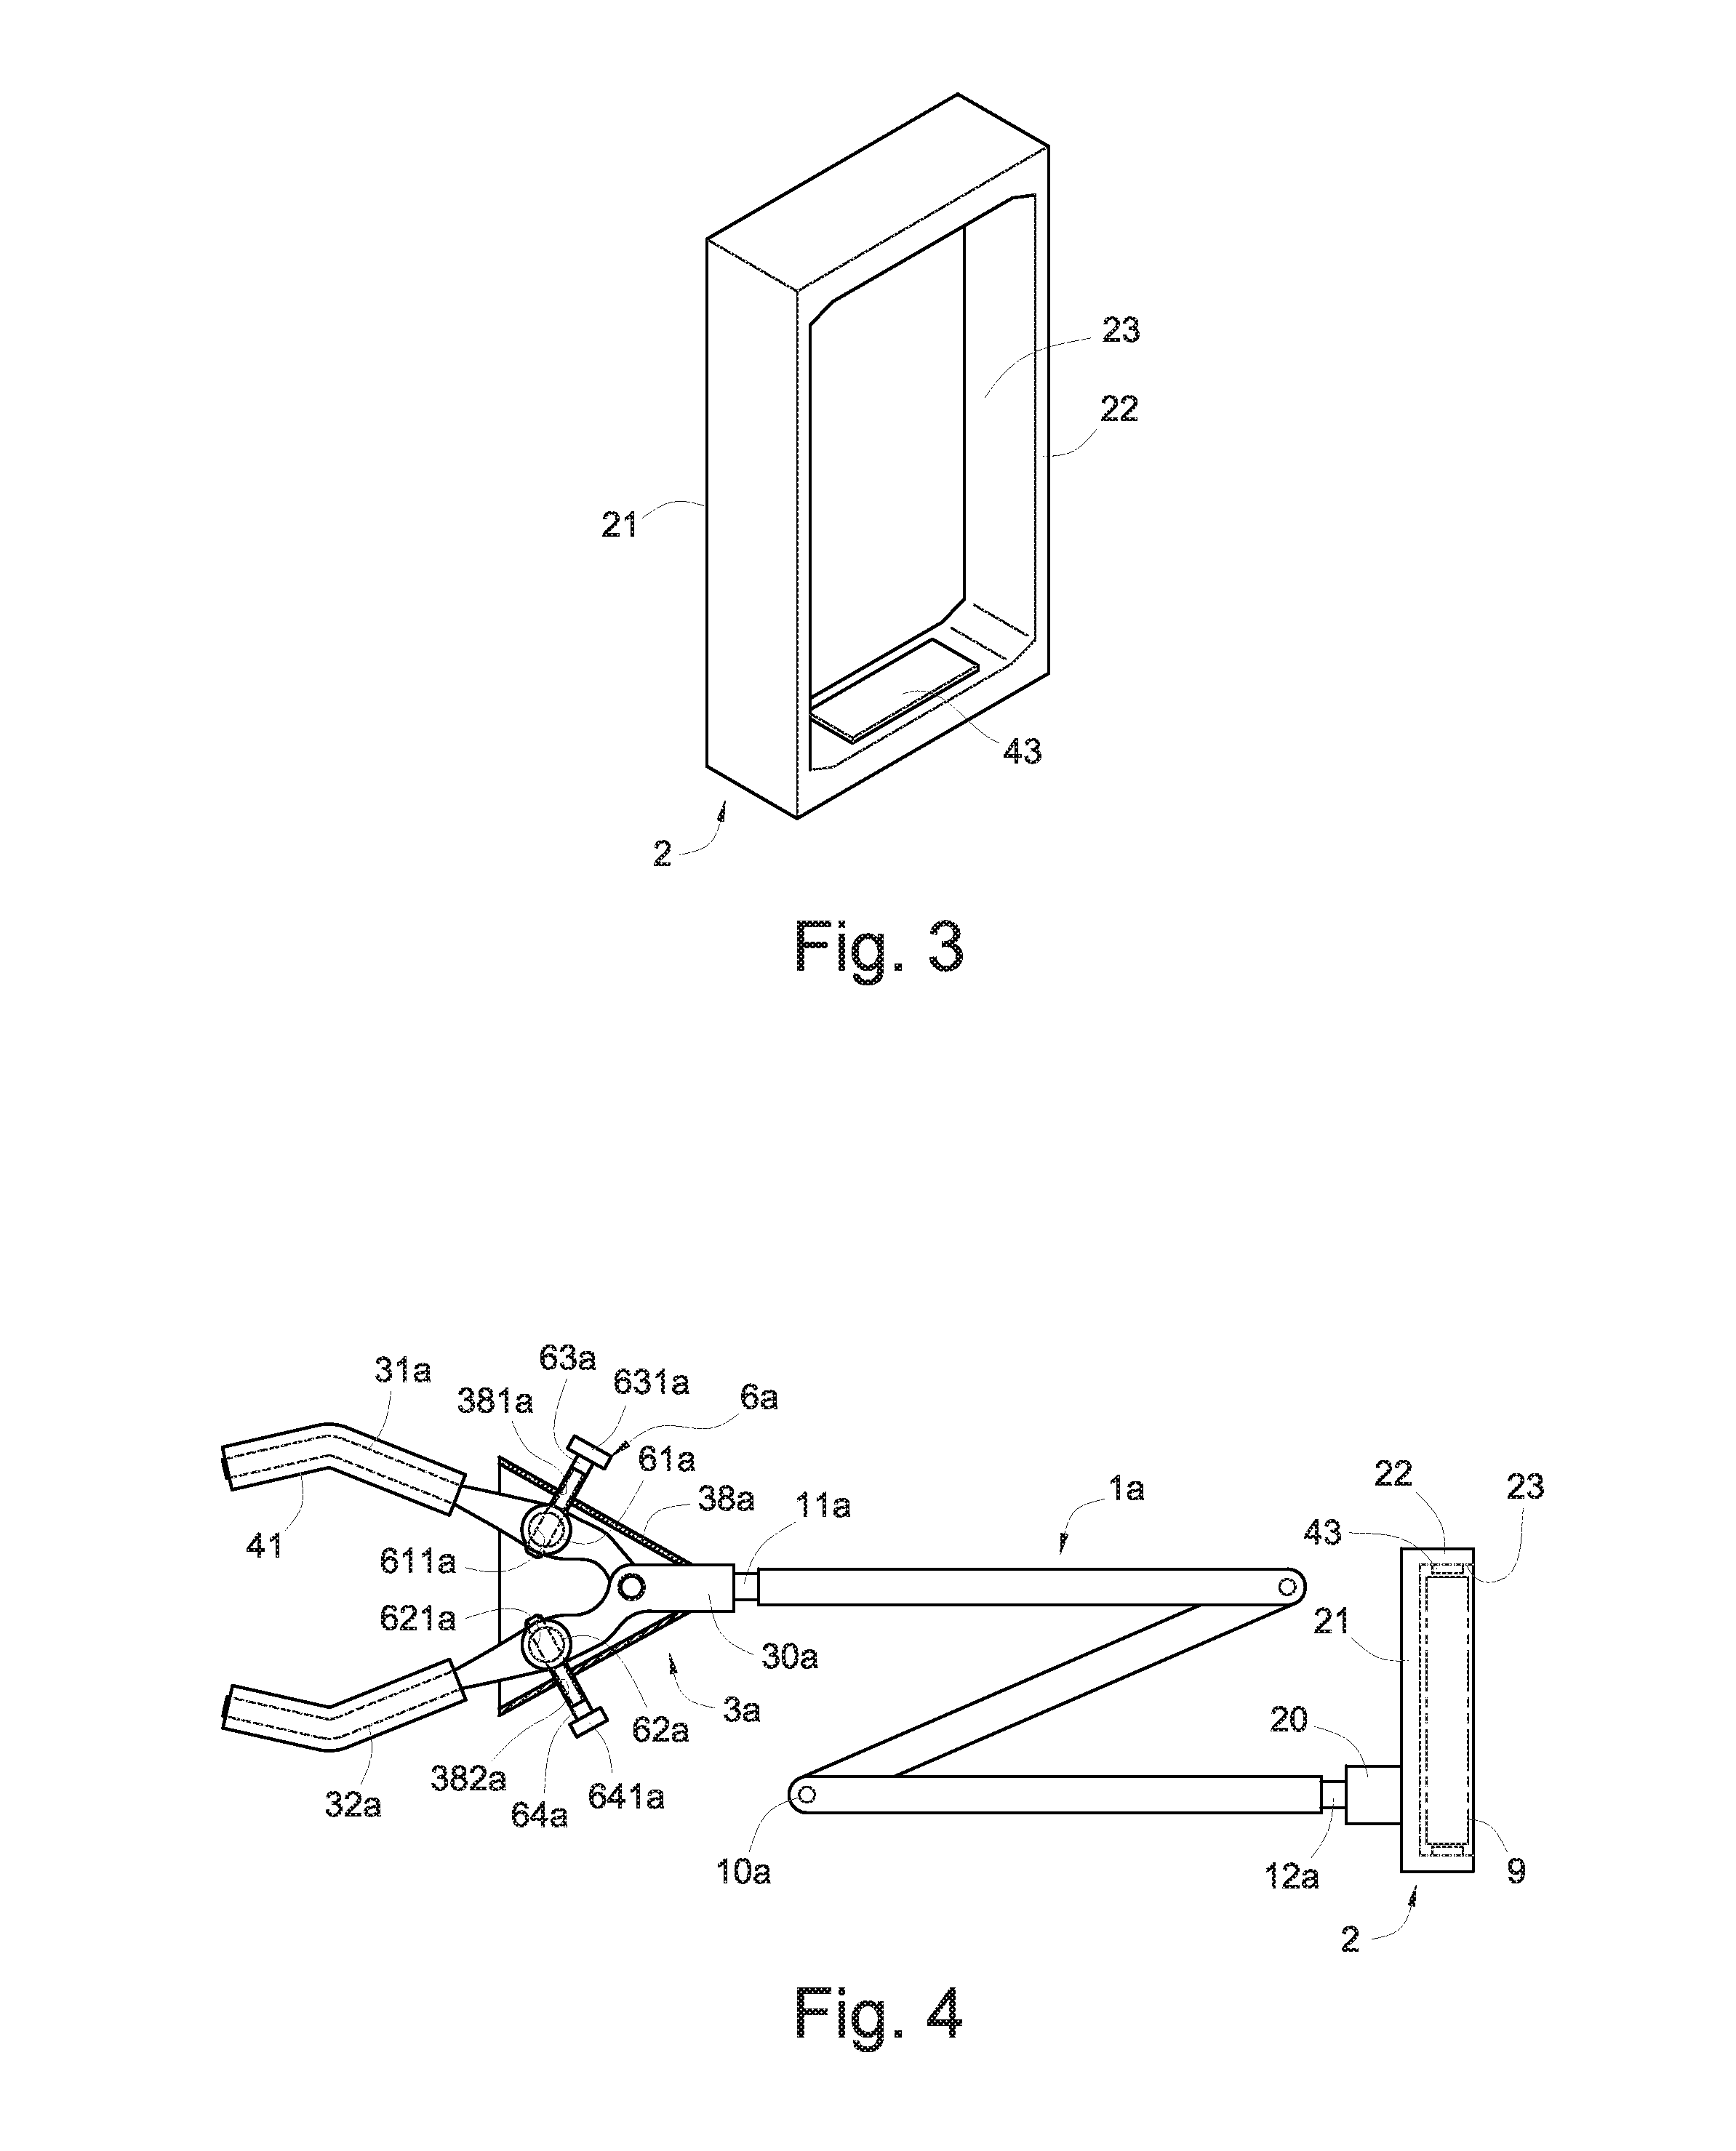 Positioning device working with fixer for handheld, portable, mobile device